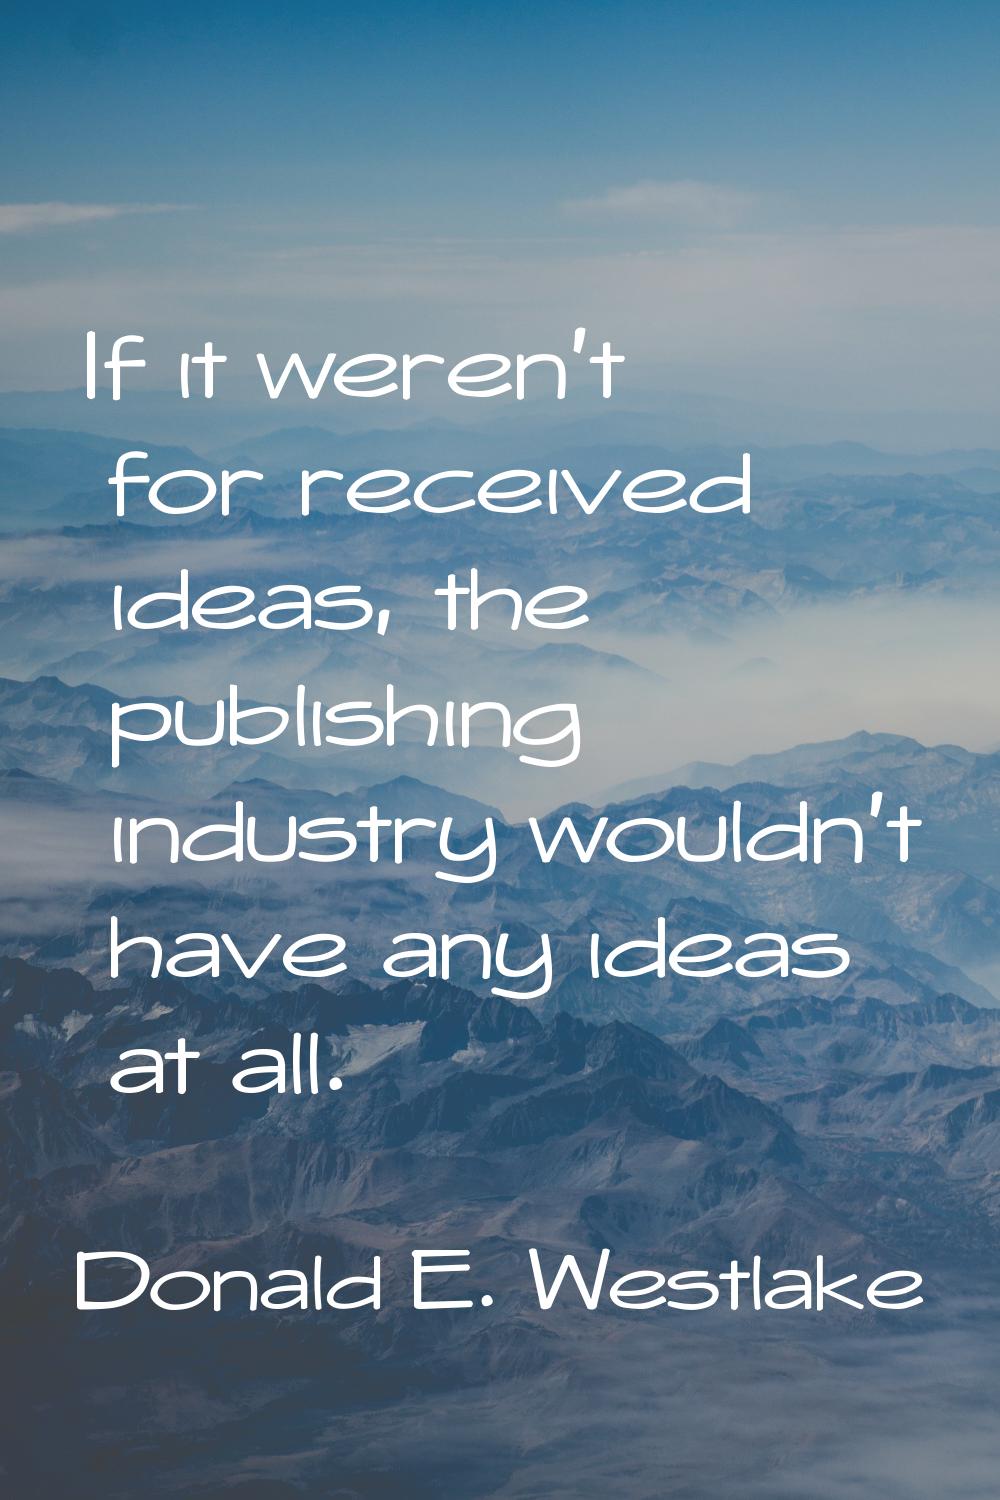 If it weren't for received ideas, the publishing industry wouldn't have any ideas at all.